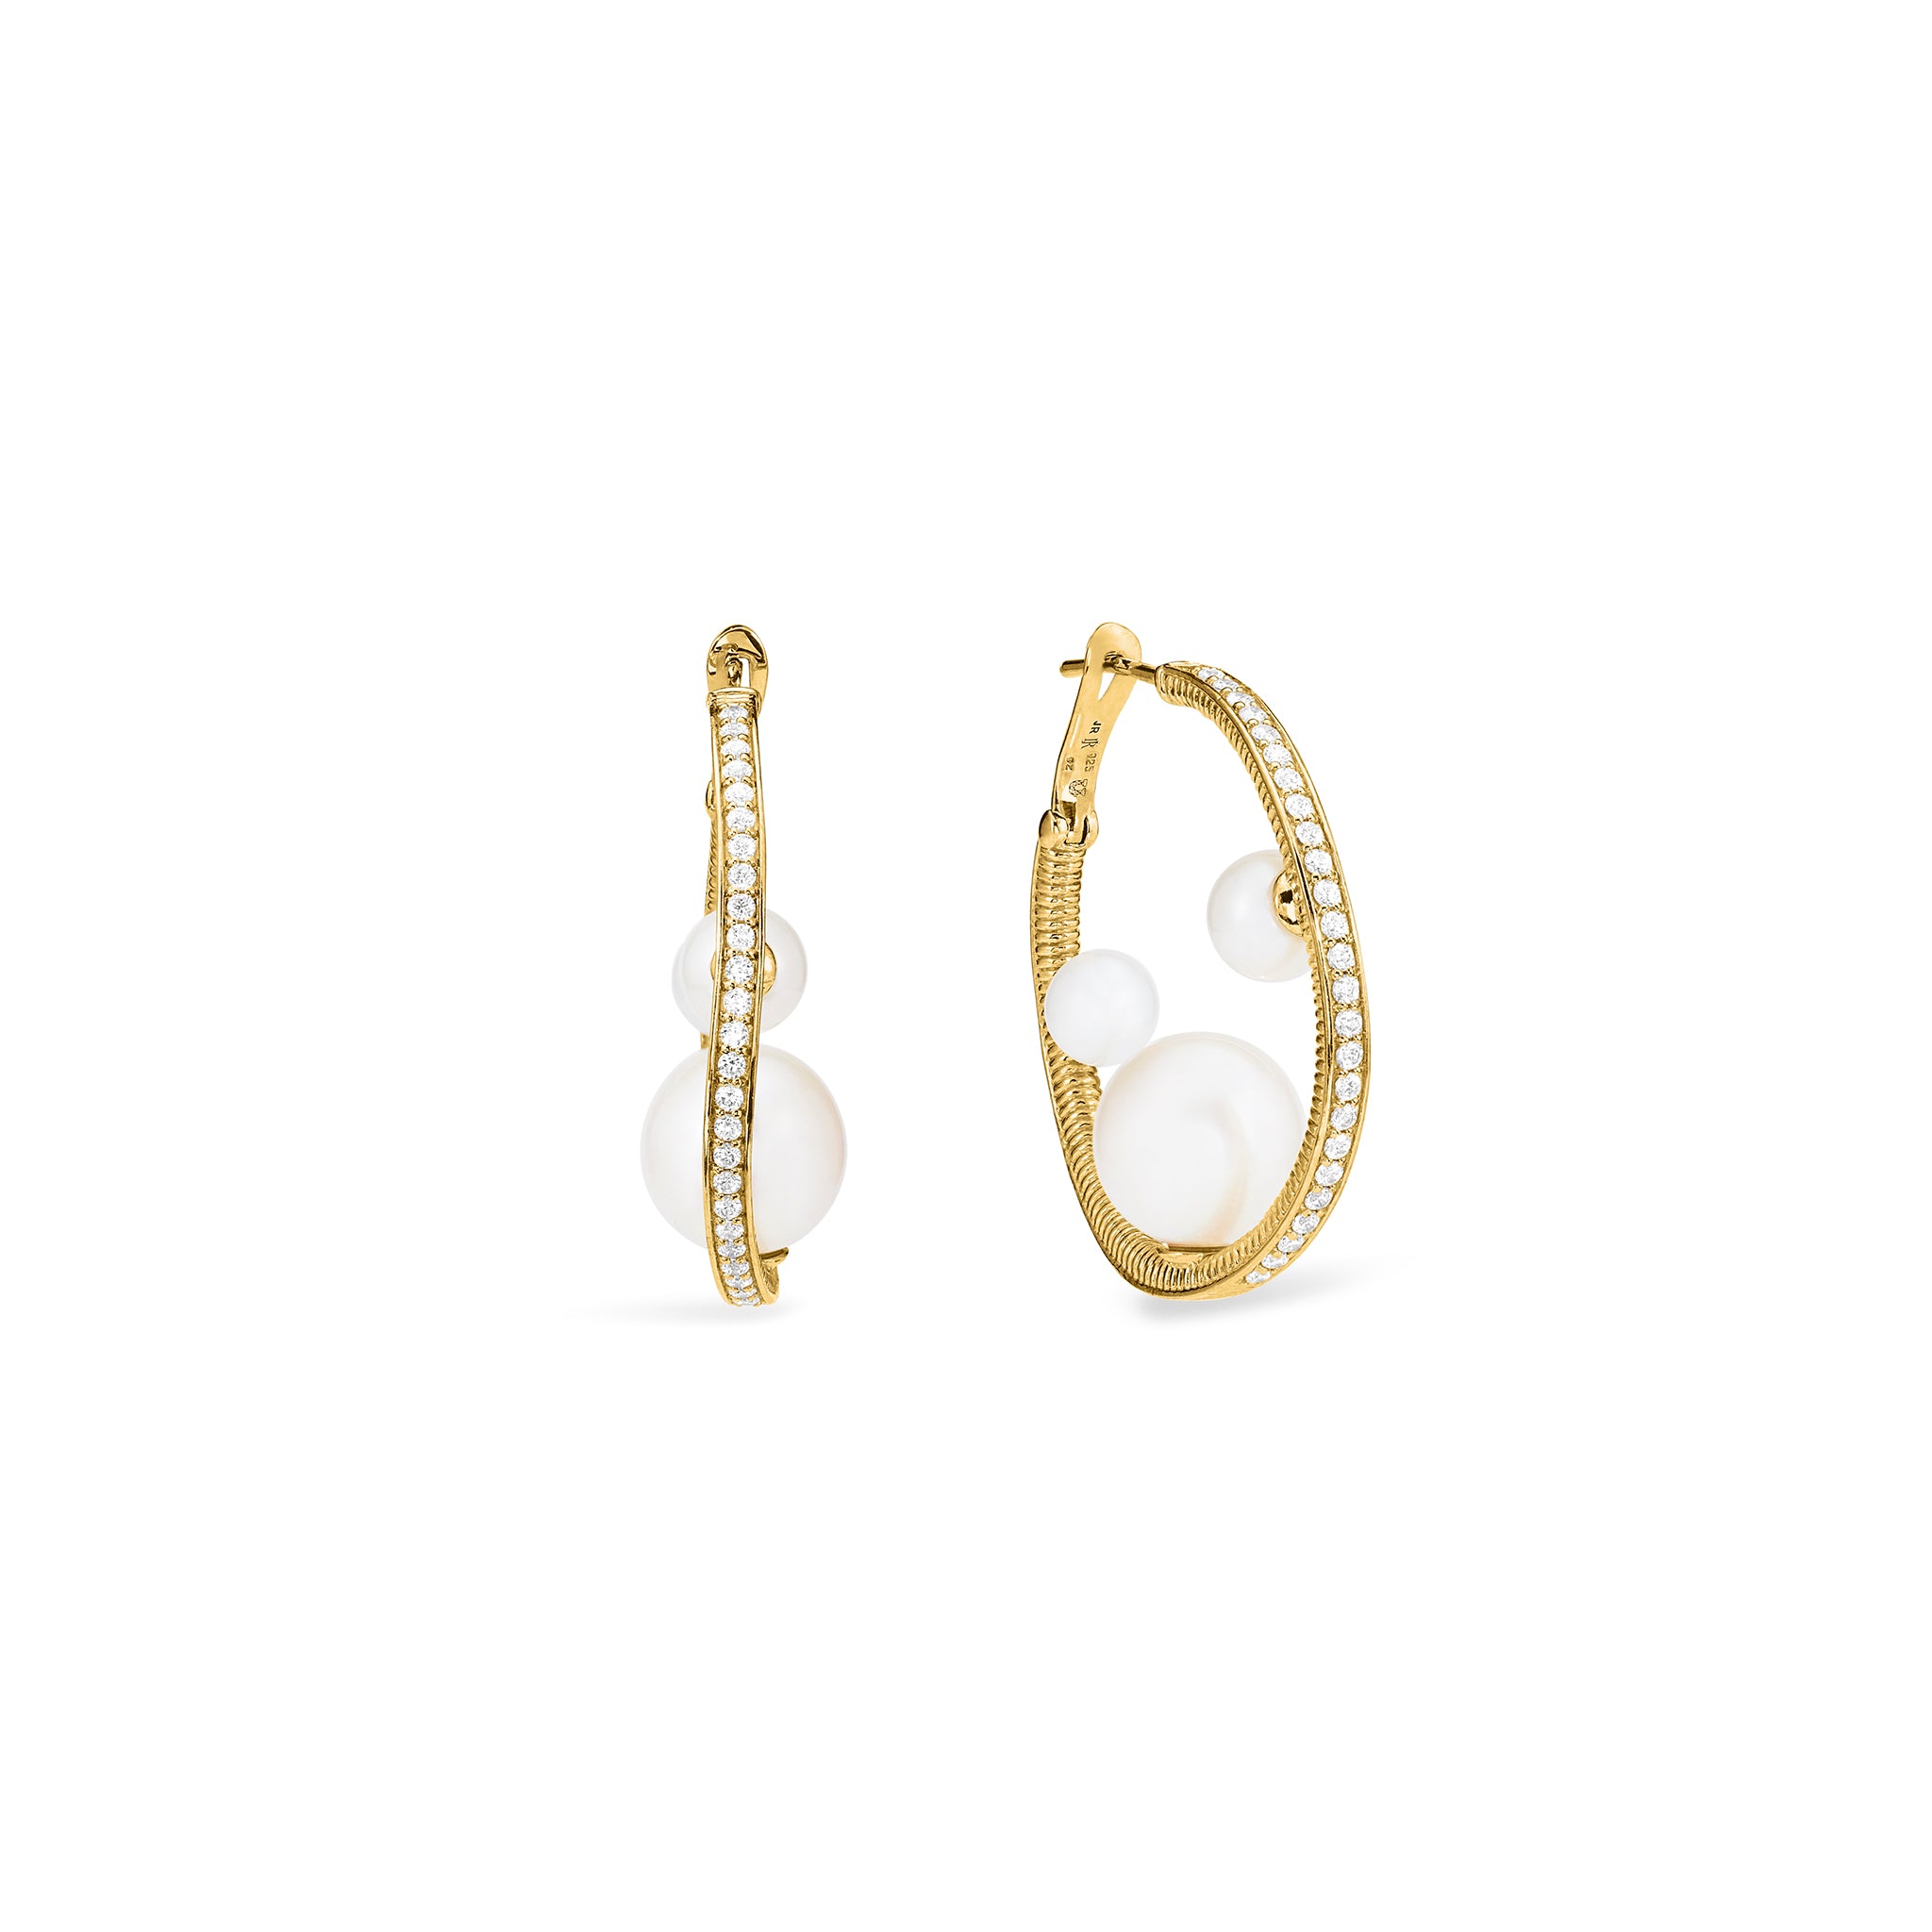 Shima Hoop Earrings With Freshwater Pearls And Diamonds In 18K